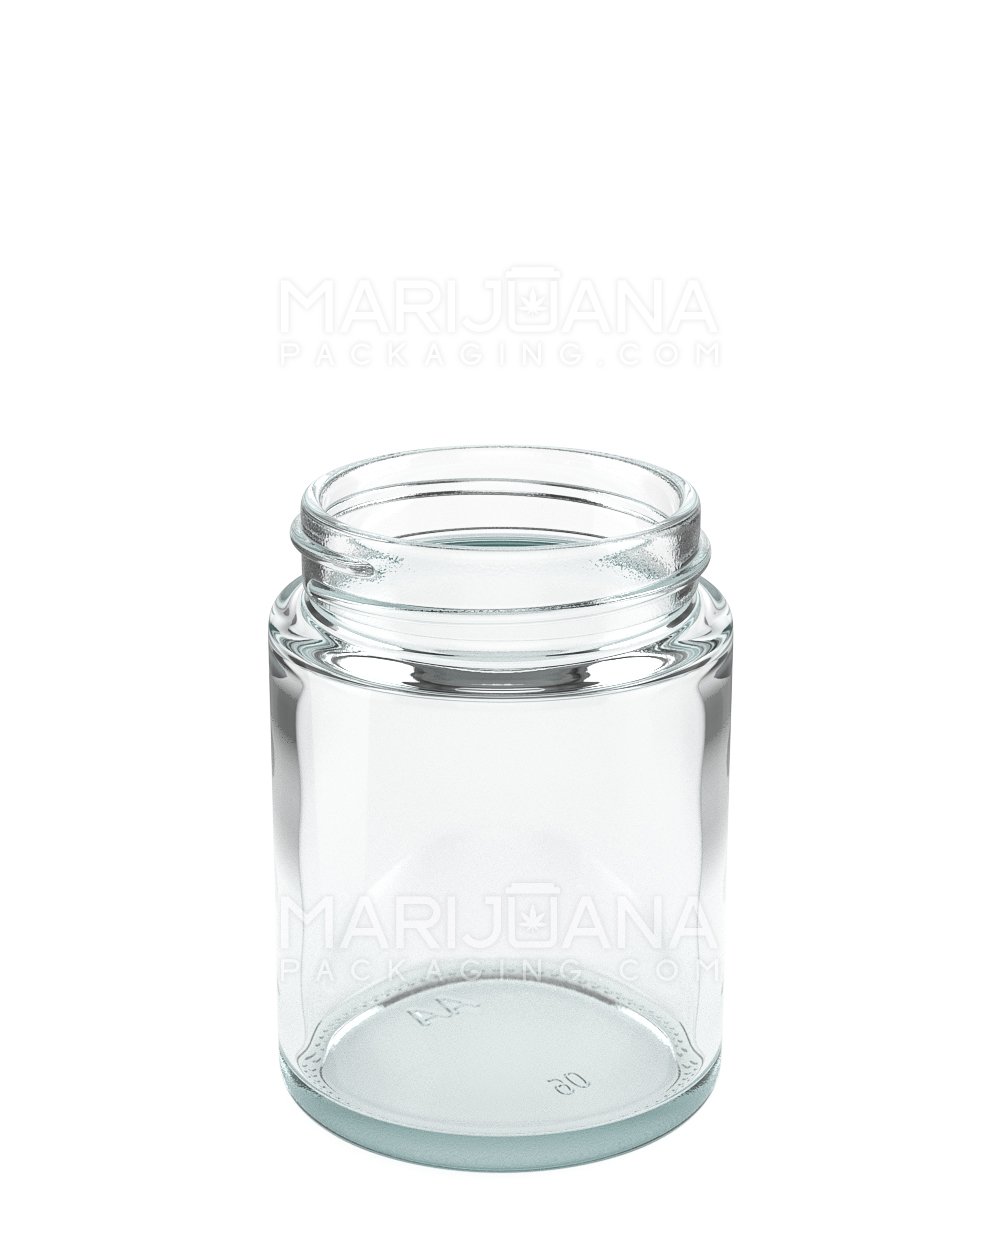 Straight Sided Clear Glass Jars with White Cap | 53mm - 4oz - 120 Count - 3